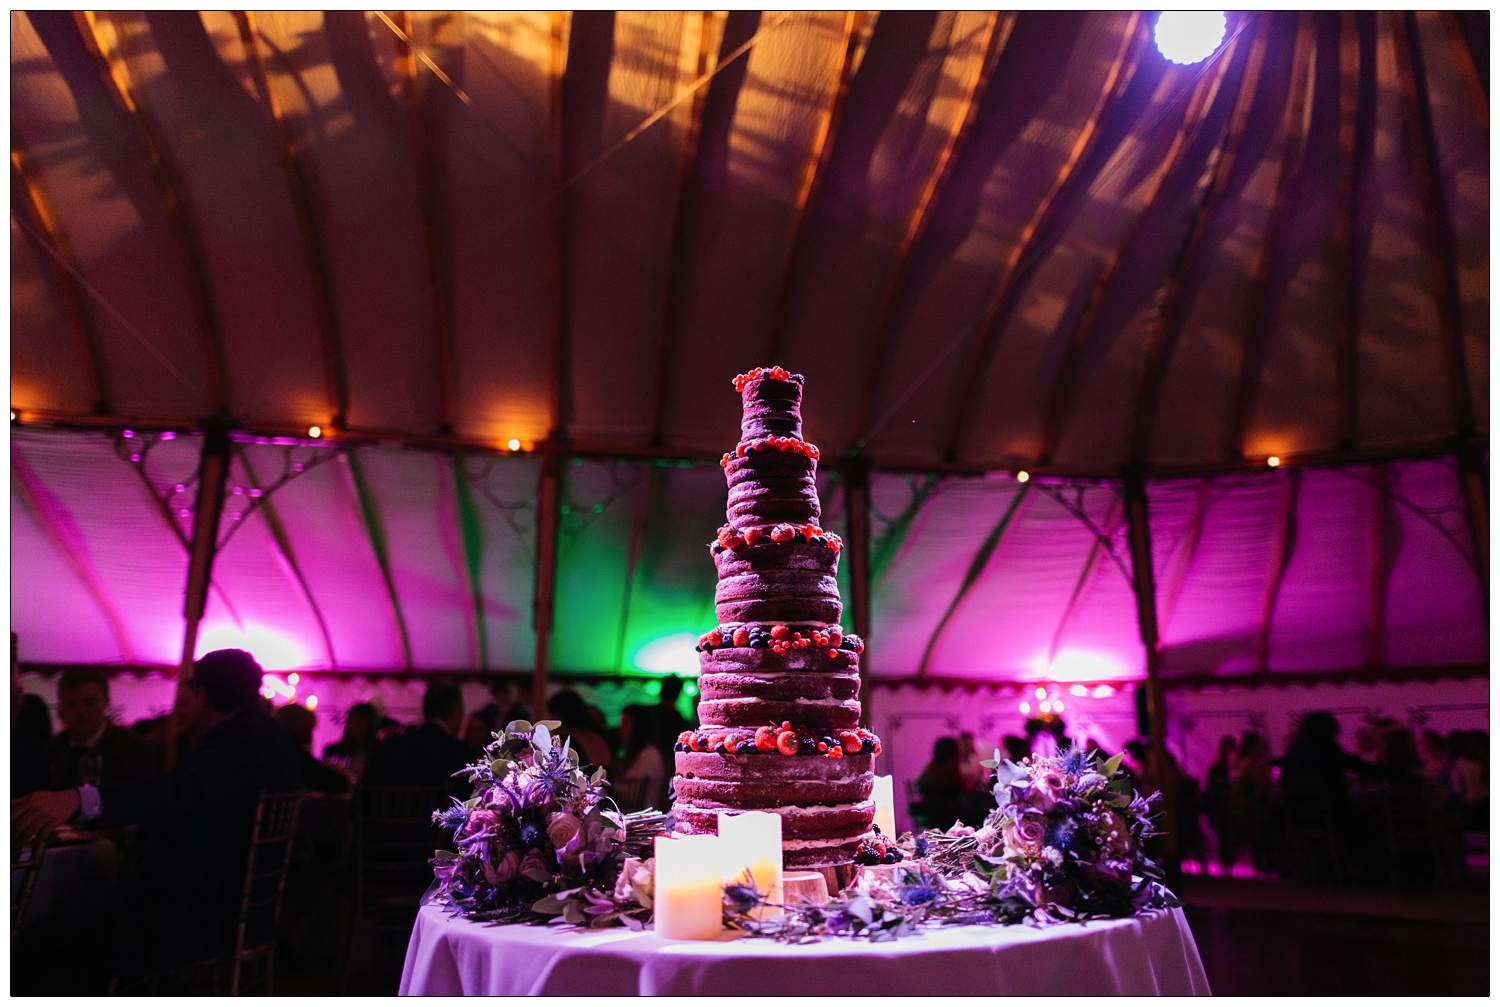 A really tall rustic style wedding cake under magenta lights.